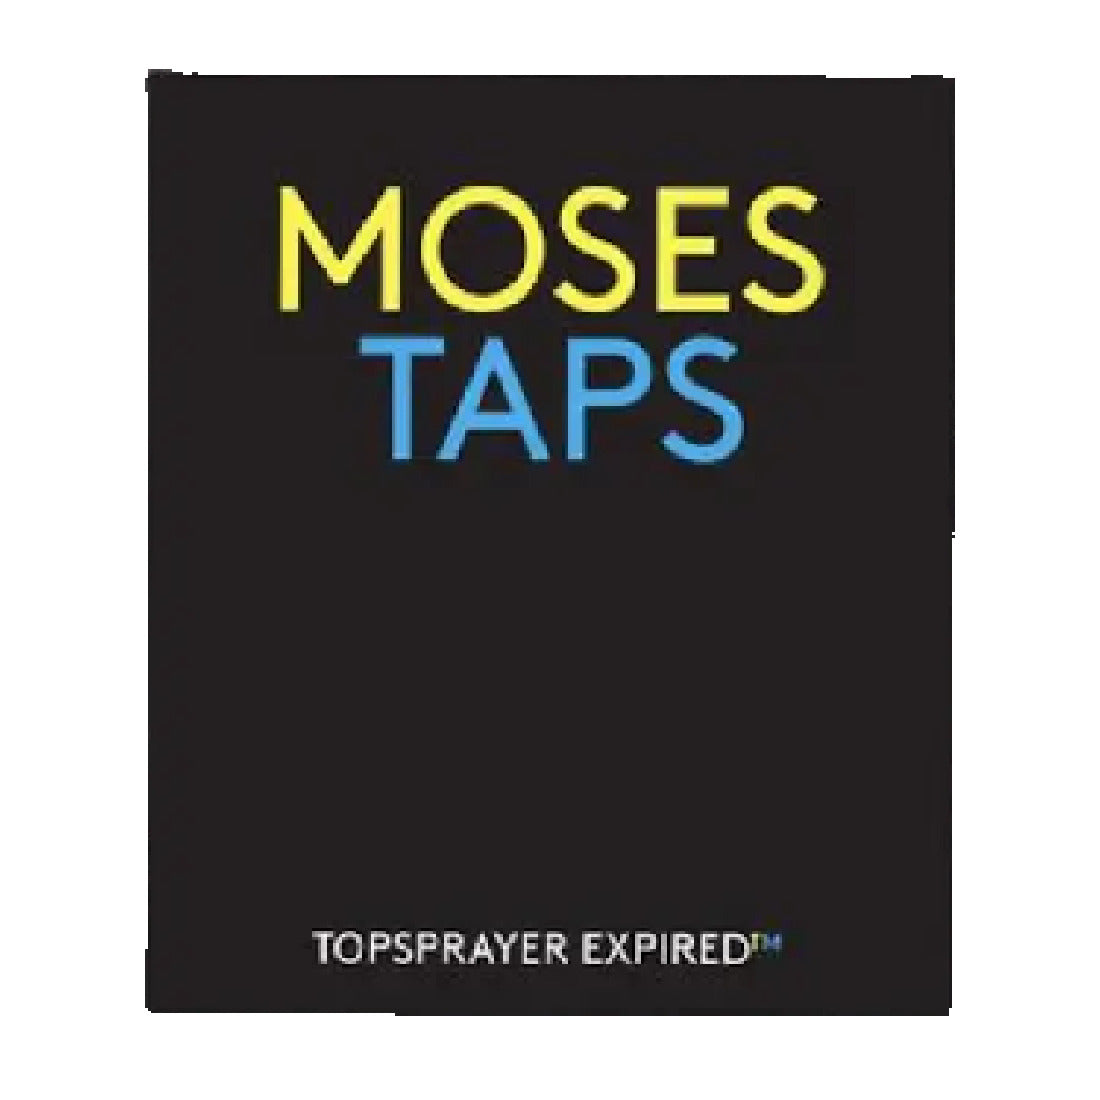 TOPSPRAYER EXPIRED - MOSES & TAPS